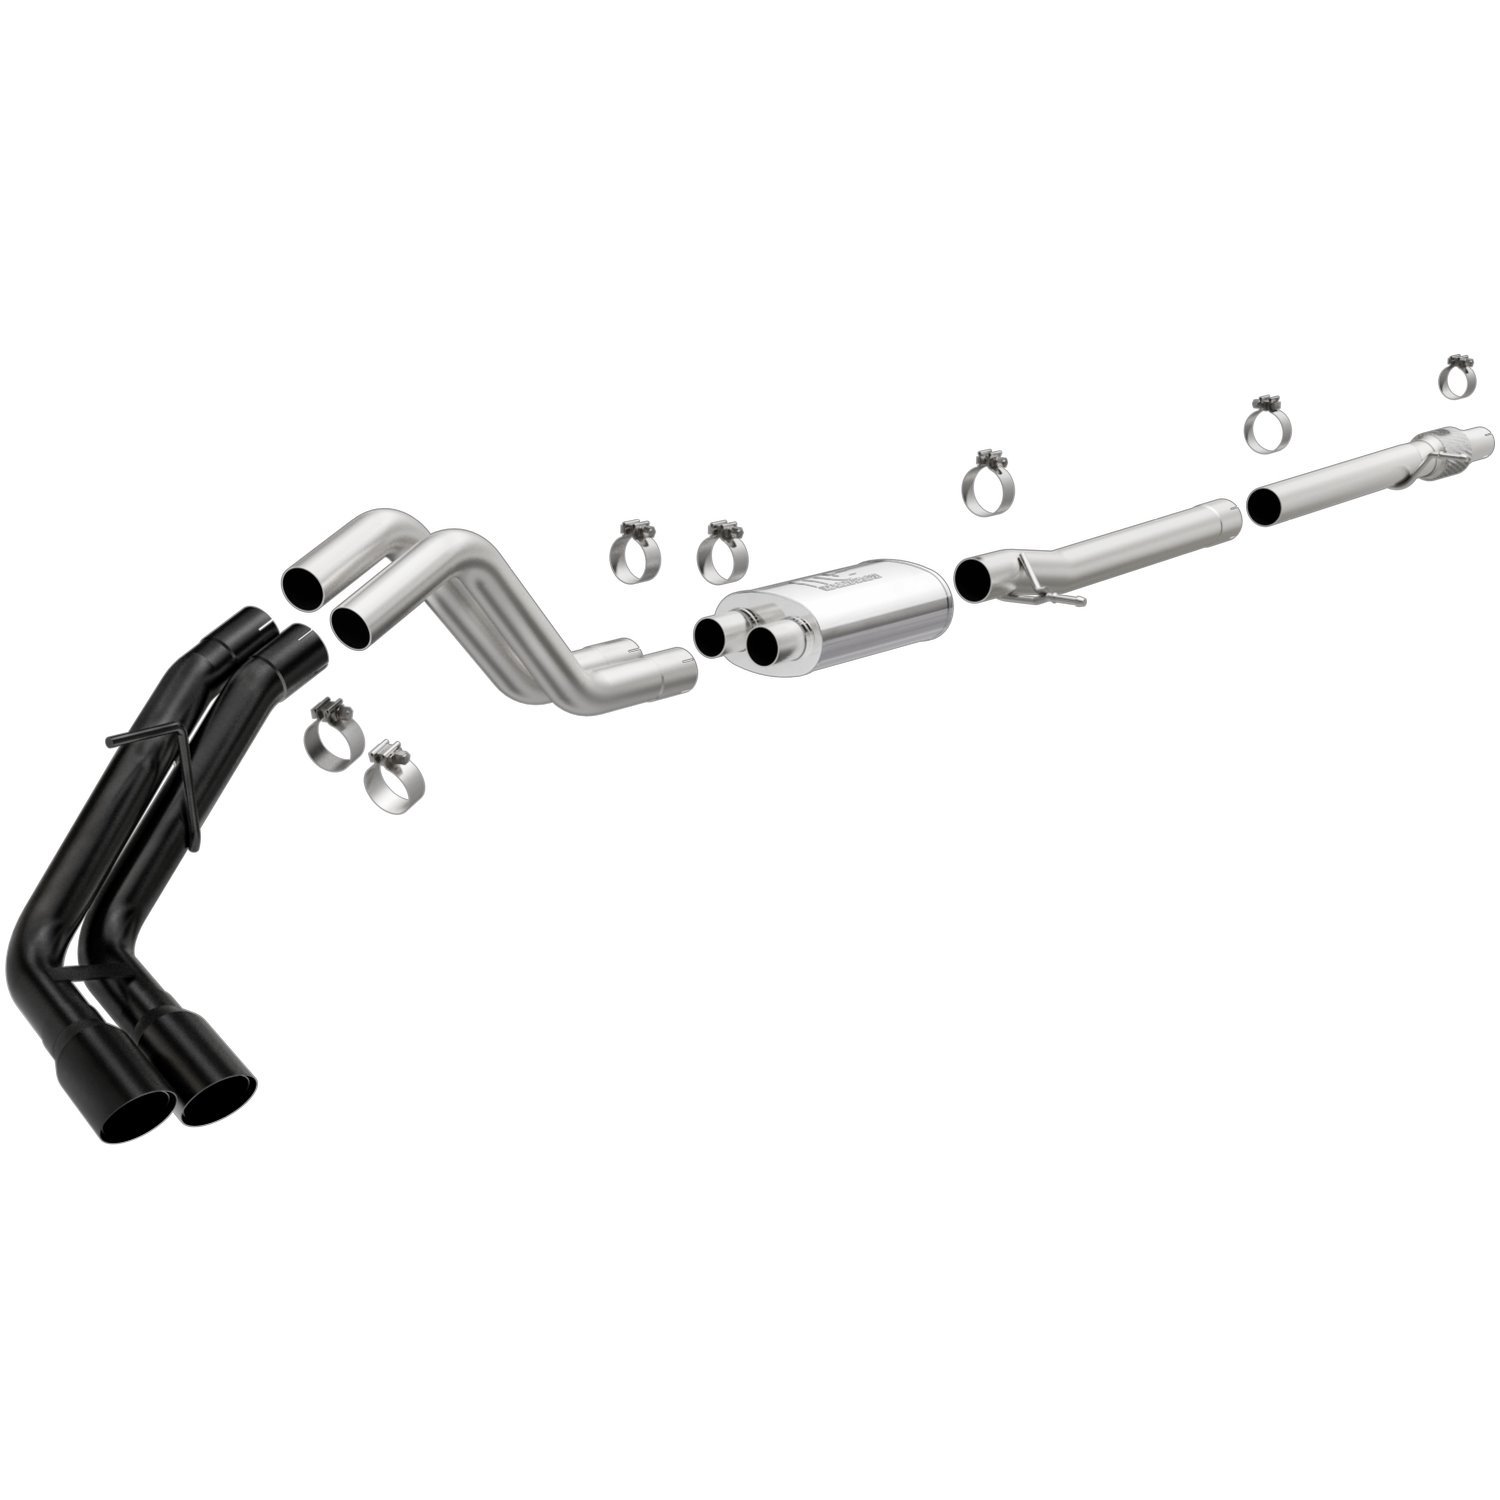 Street Series Cat-Back Exhaust System 2019 Ford Ranger 2.3L - Black Coated Tips